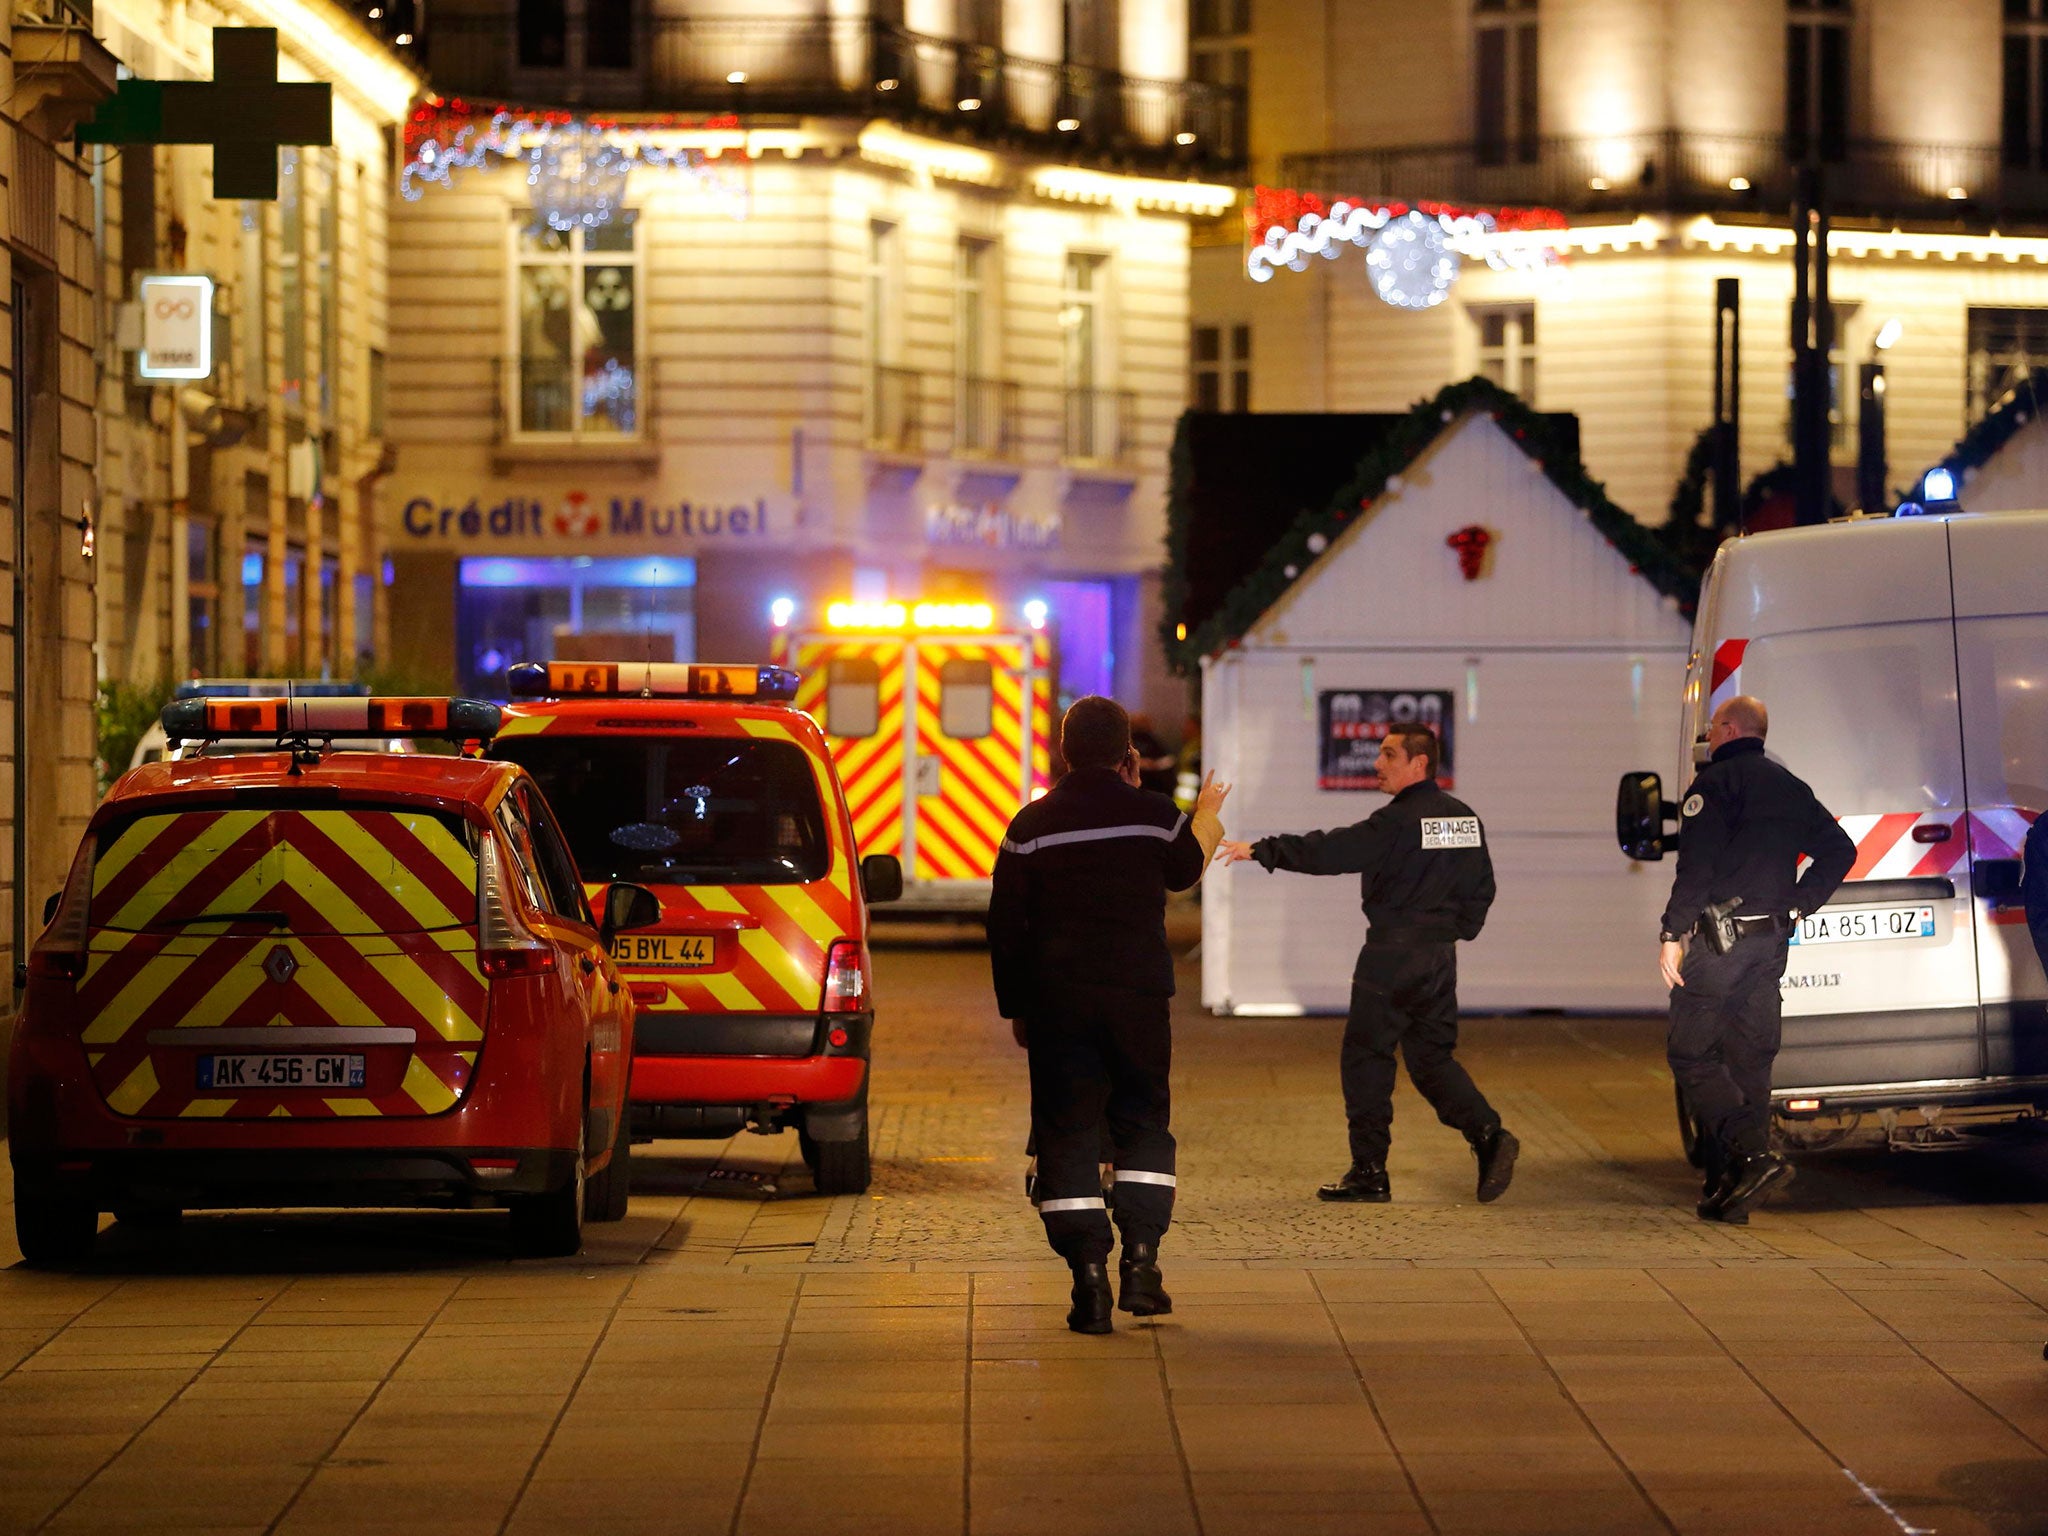 Eleven people were hurt, five seriously, when a van drove into a Christmas market in Nantes